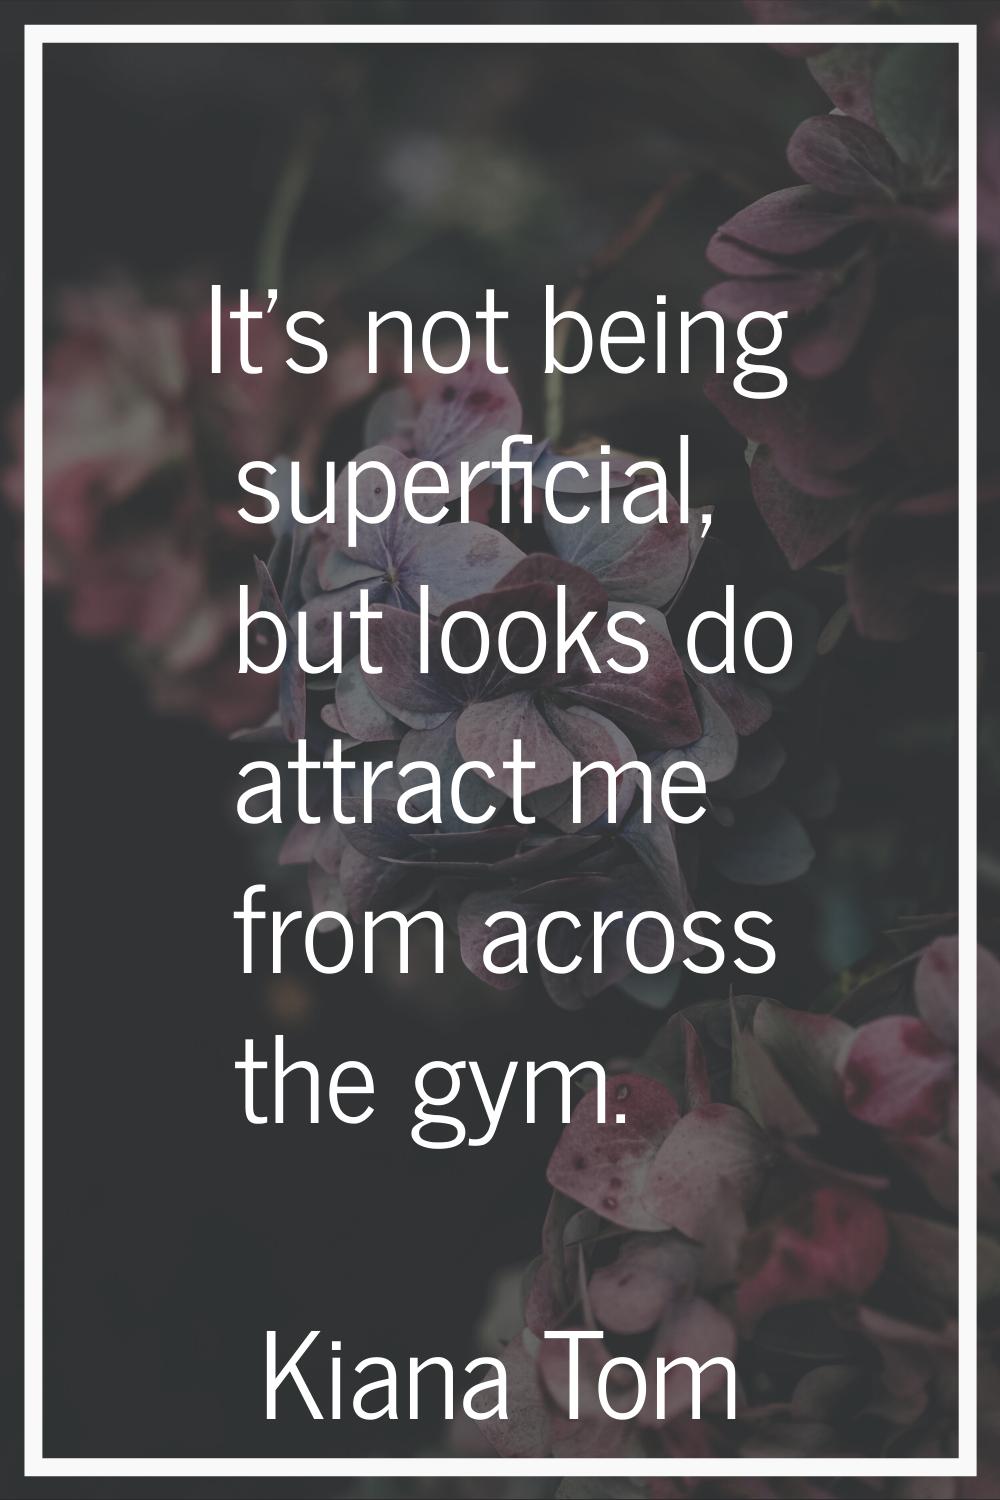 It's not being superficial, but looks do attract me from across the gym.